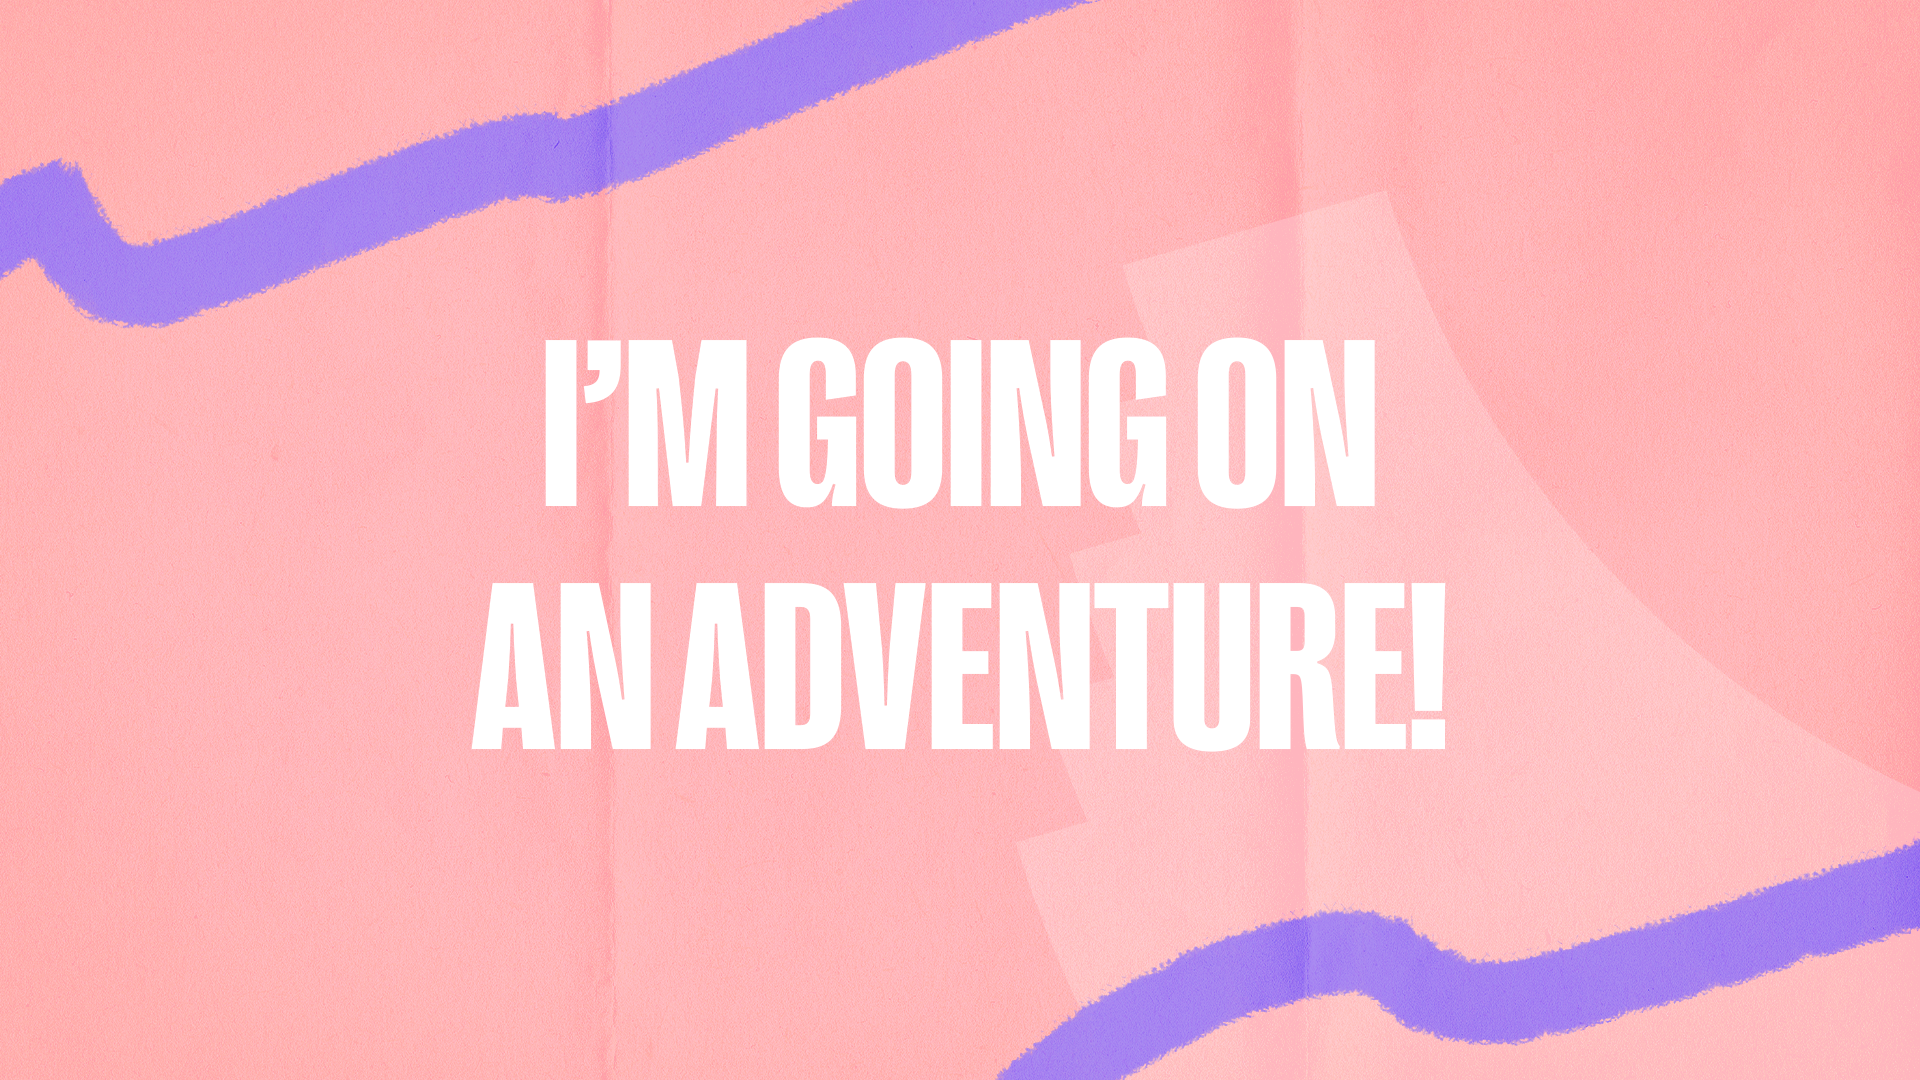 I’m going on an adventure!